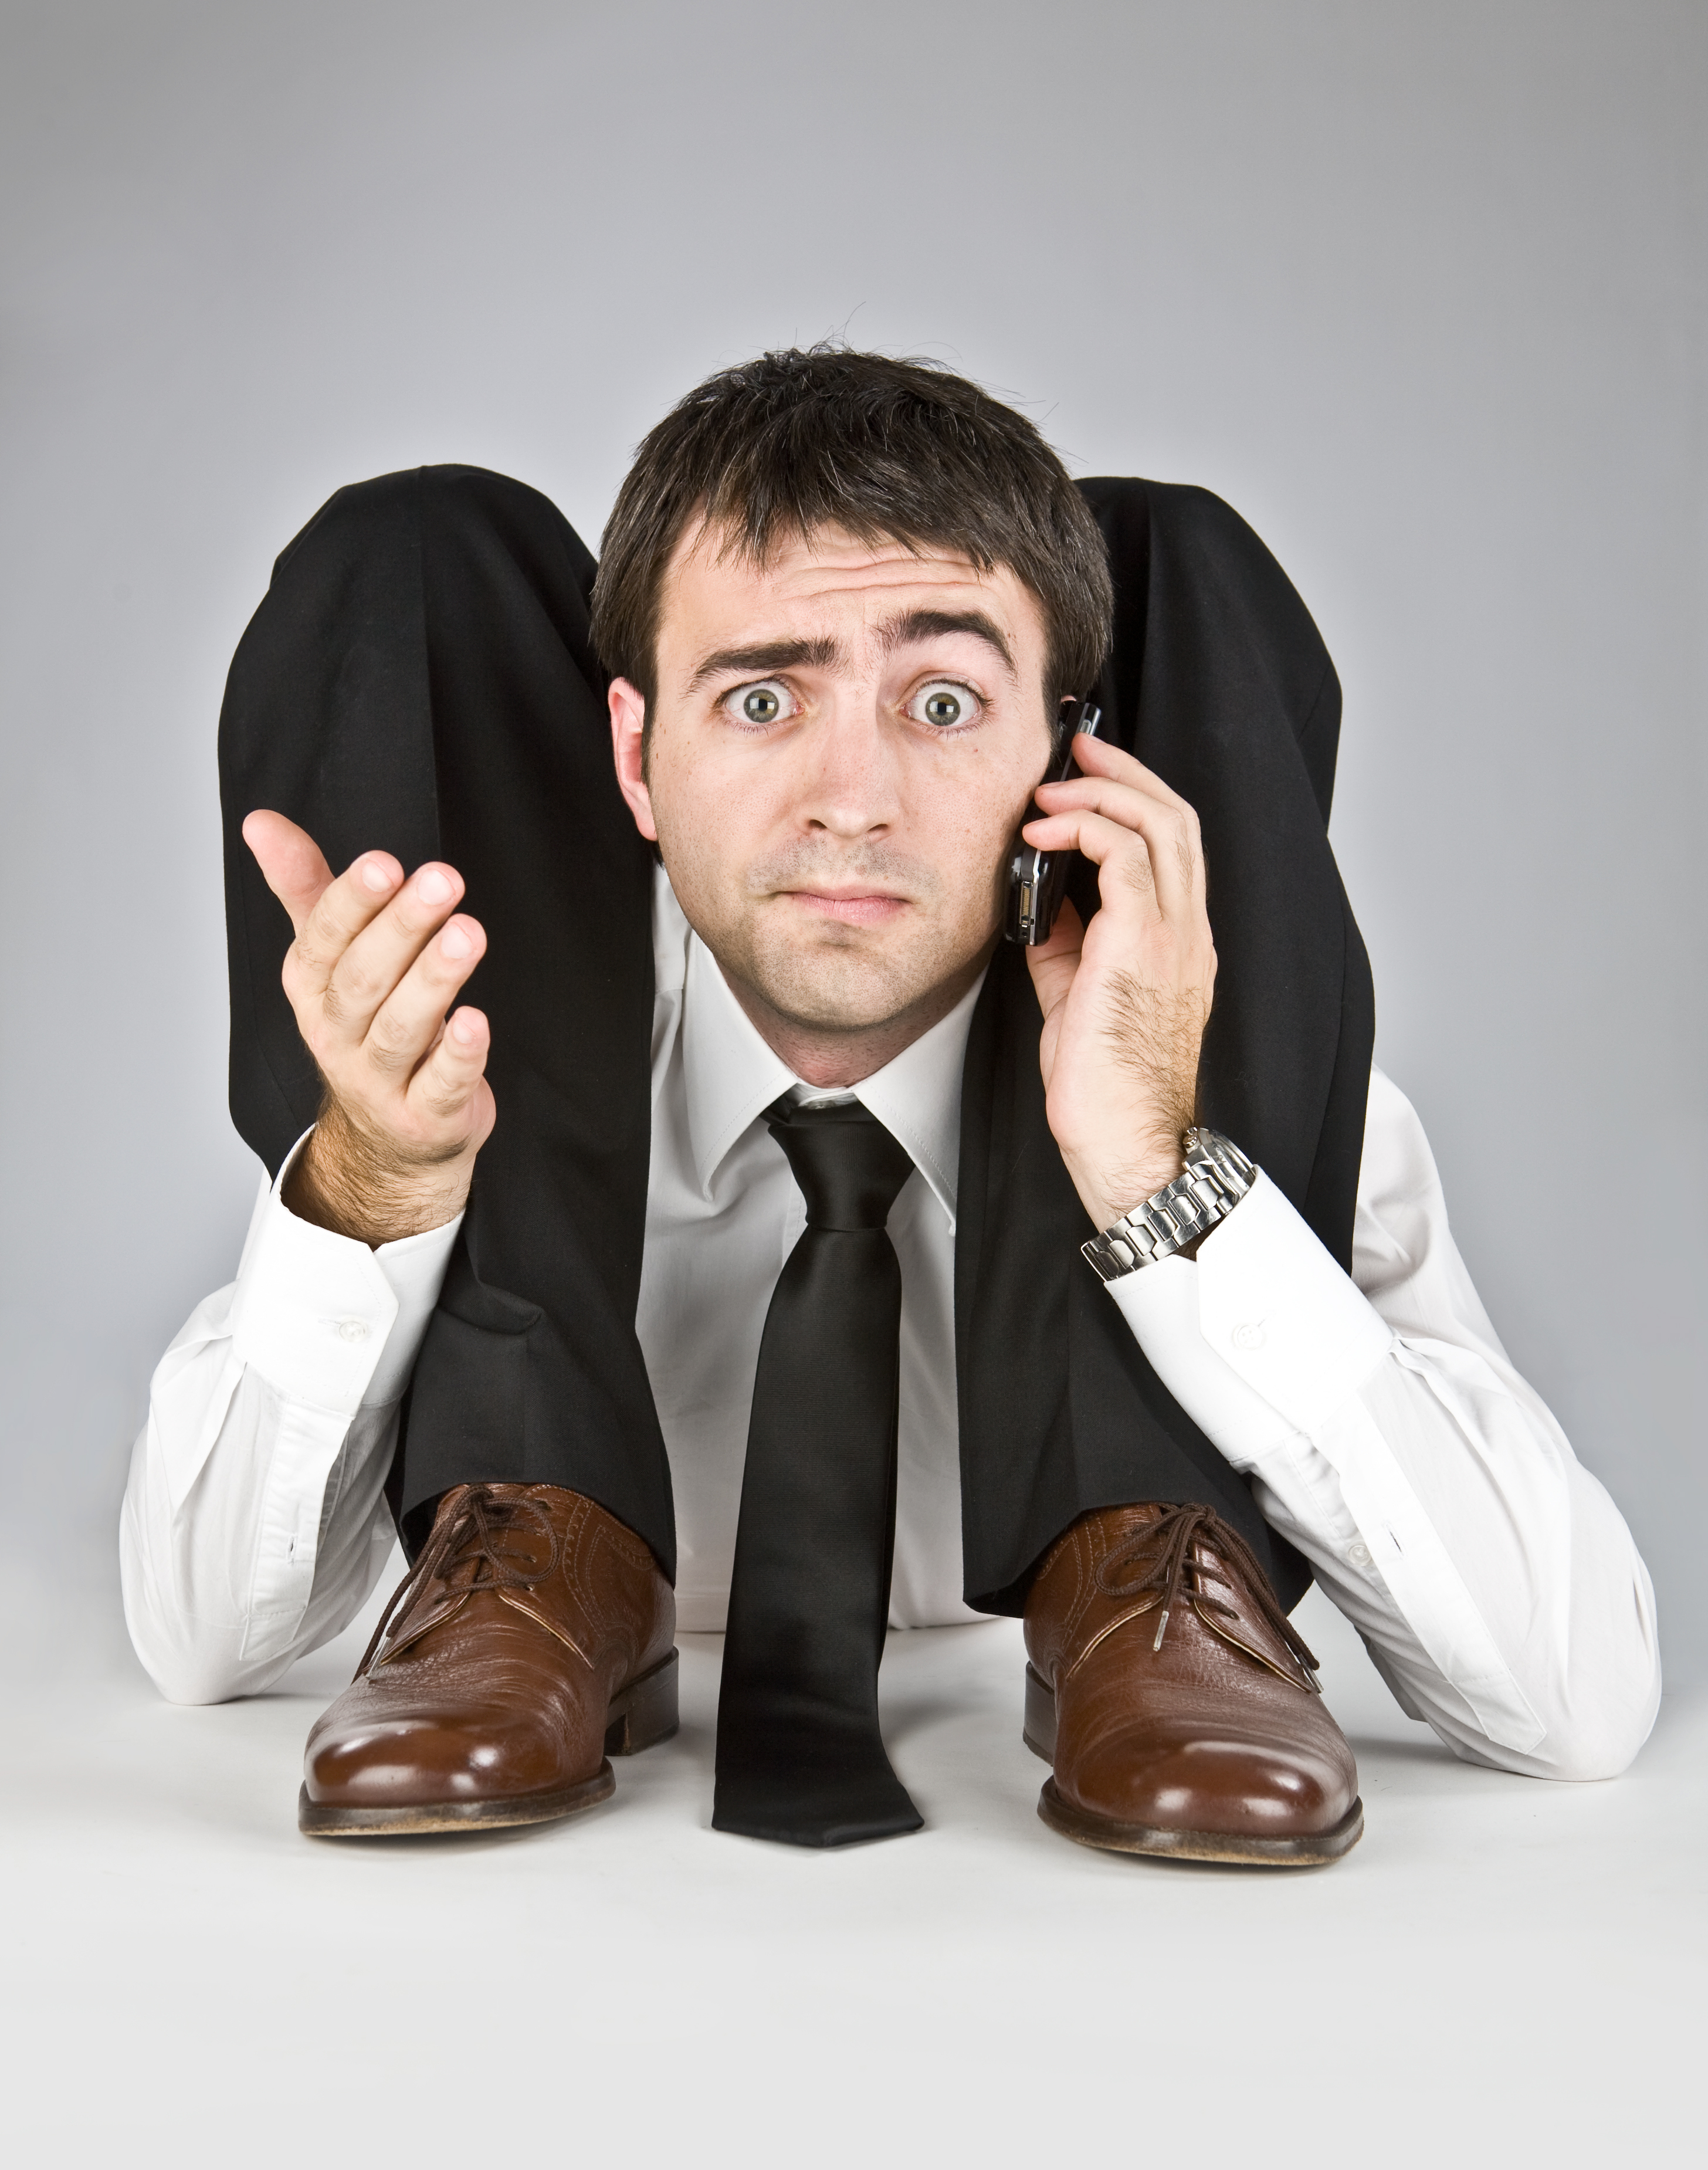 contortion business manager telephones for work